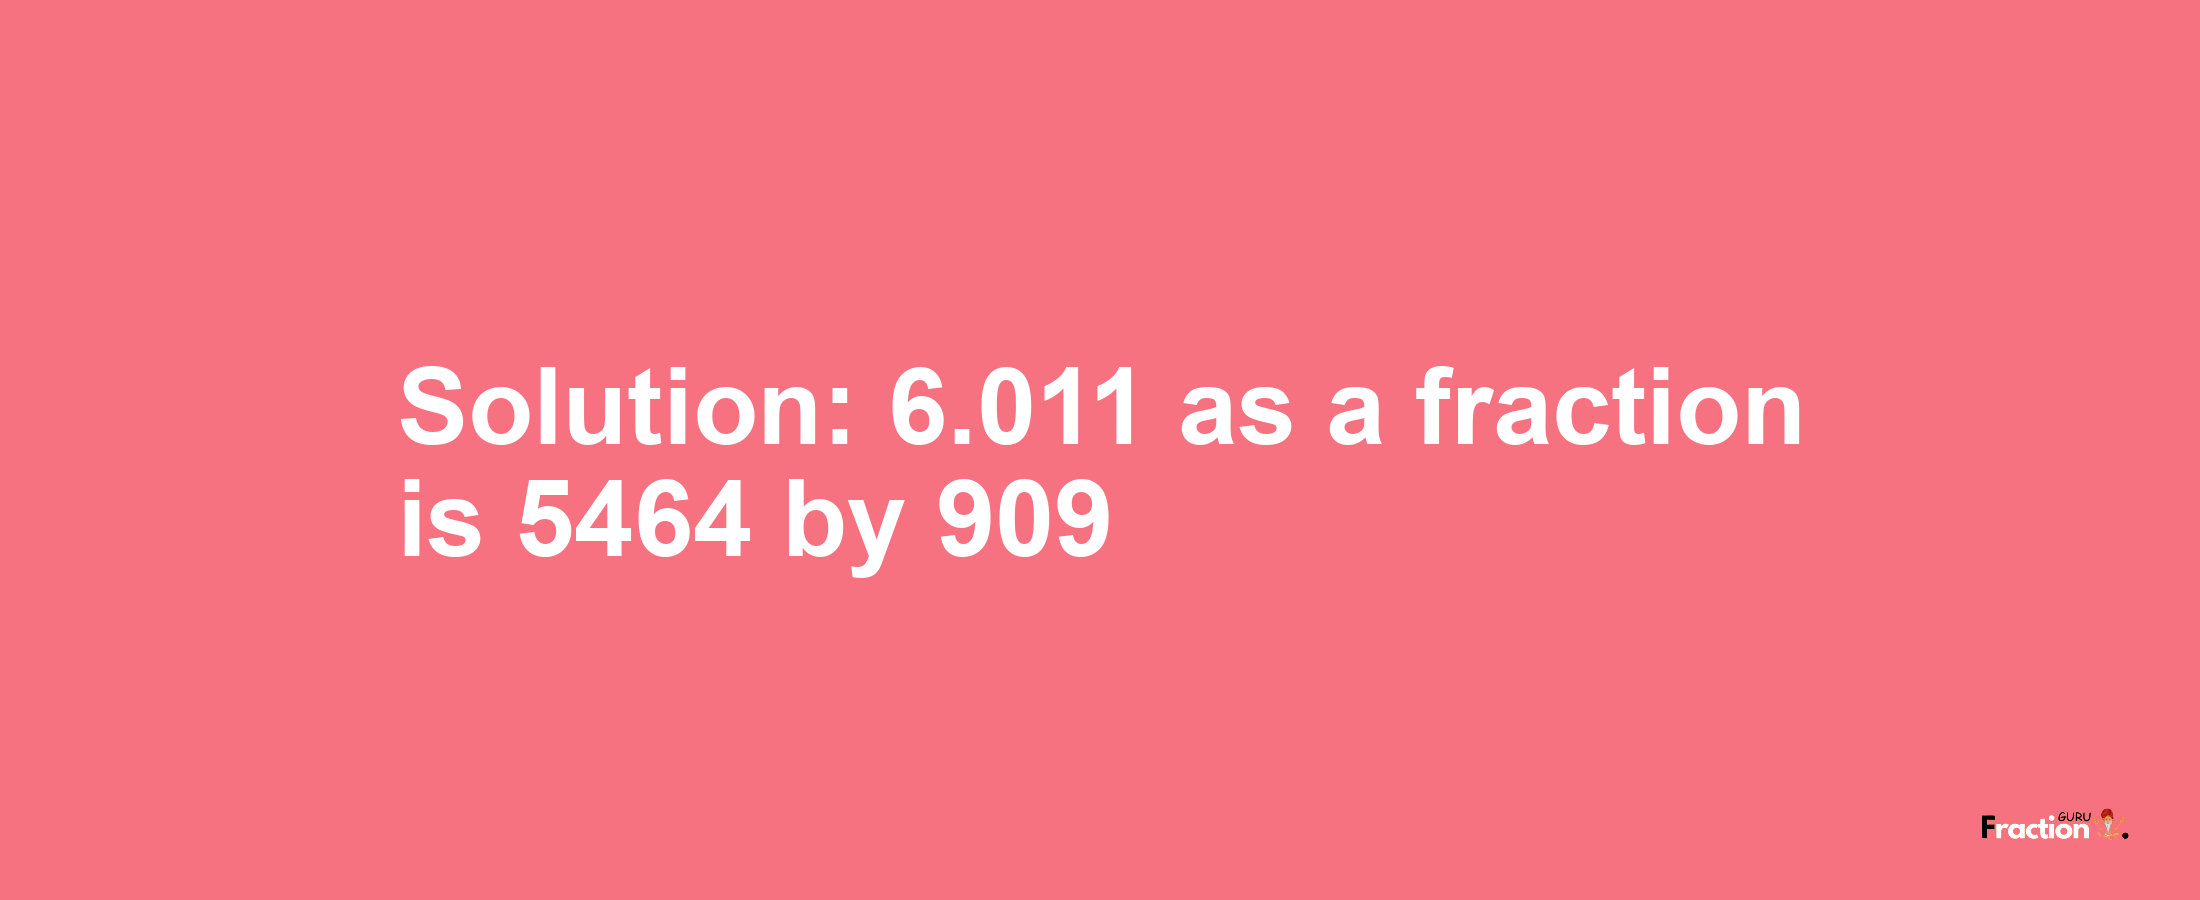 Solution:6.011 as a fraction is 5464/909